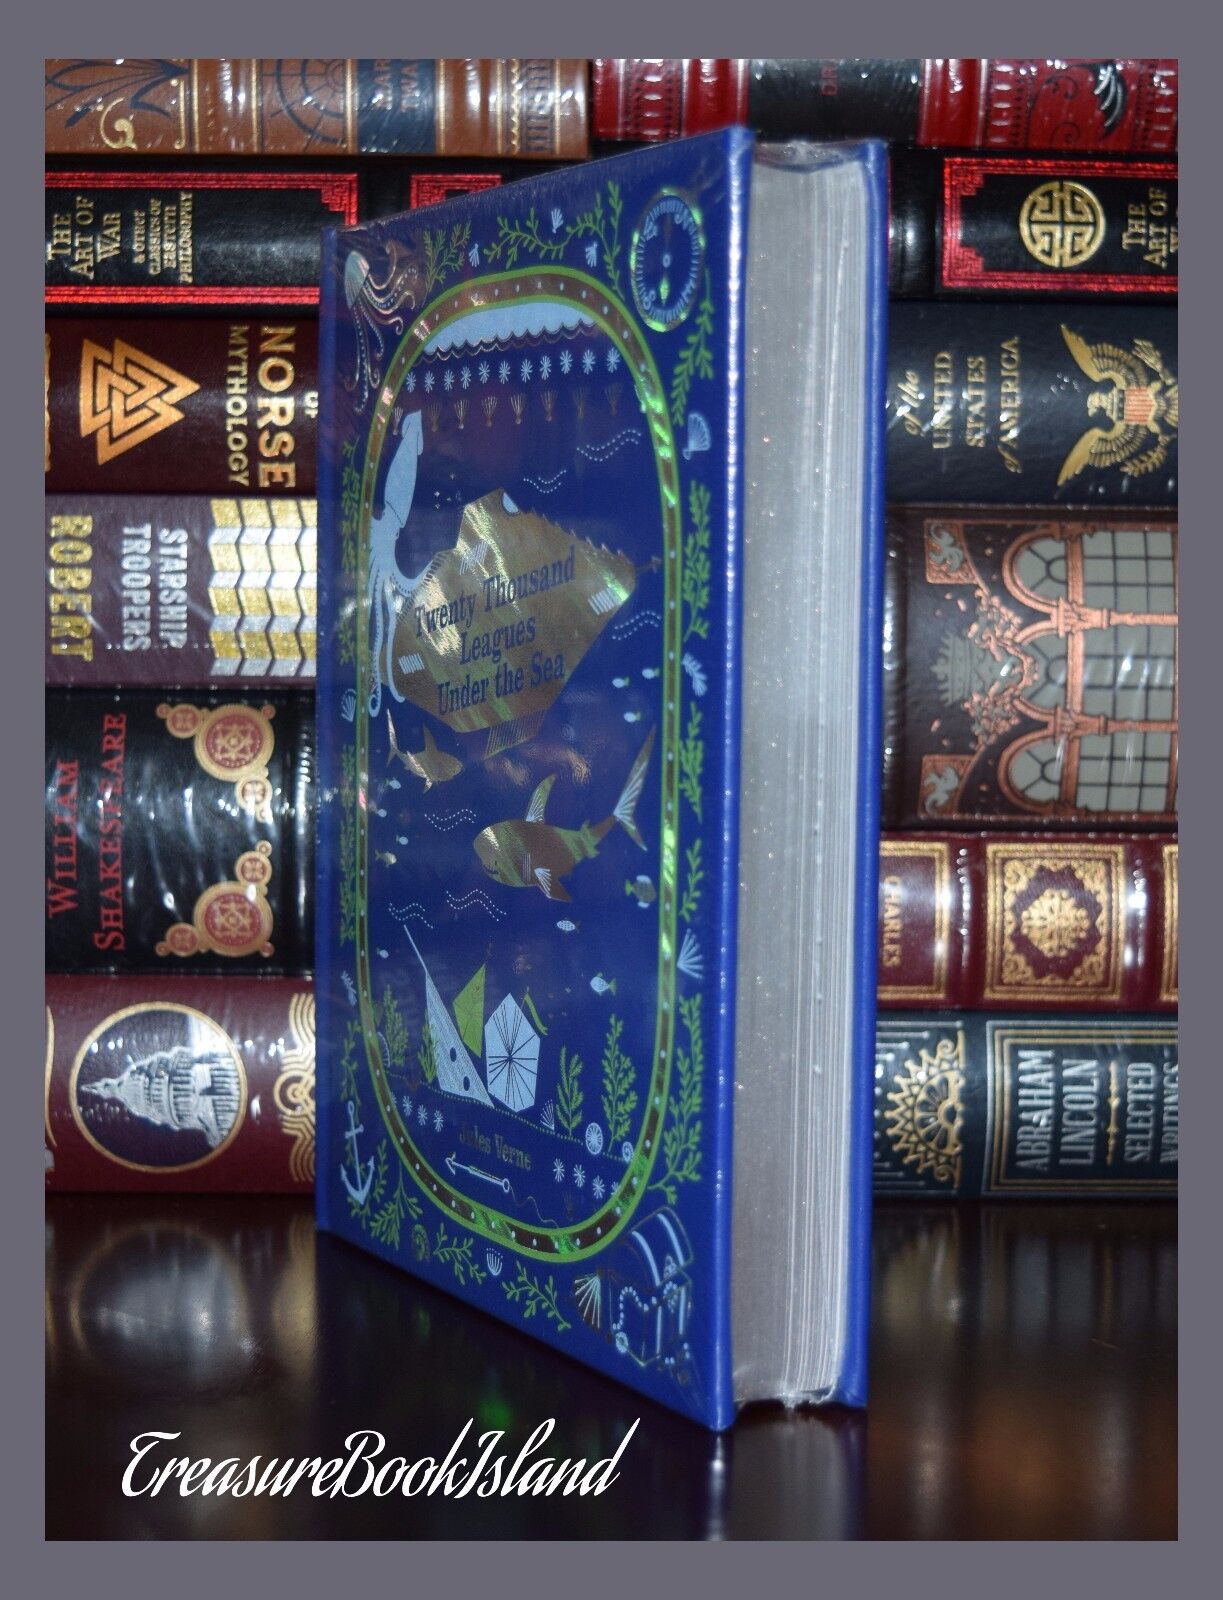 Twenty Thousand Leagues Under the Sea by Jules Verne New Sealed Leather Bound Ed Без бренда - фотография #4